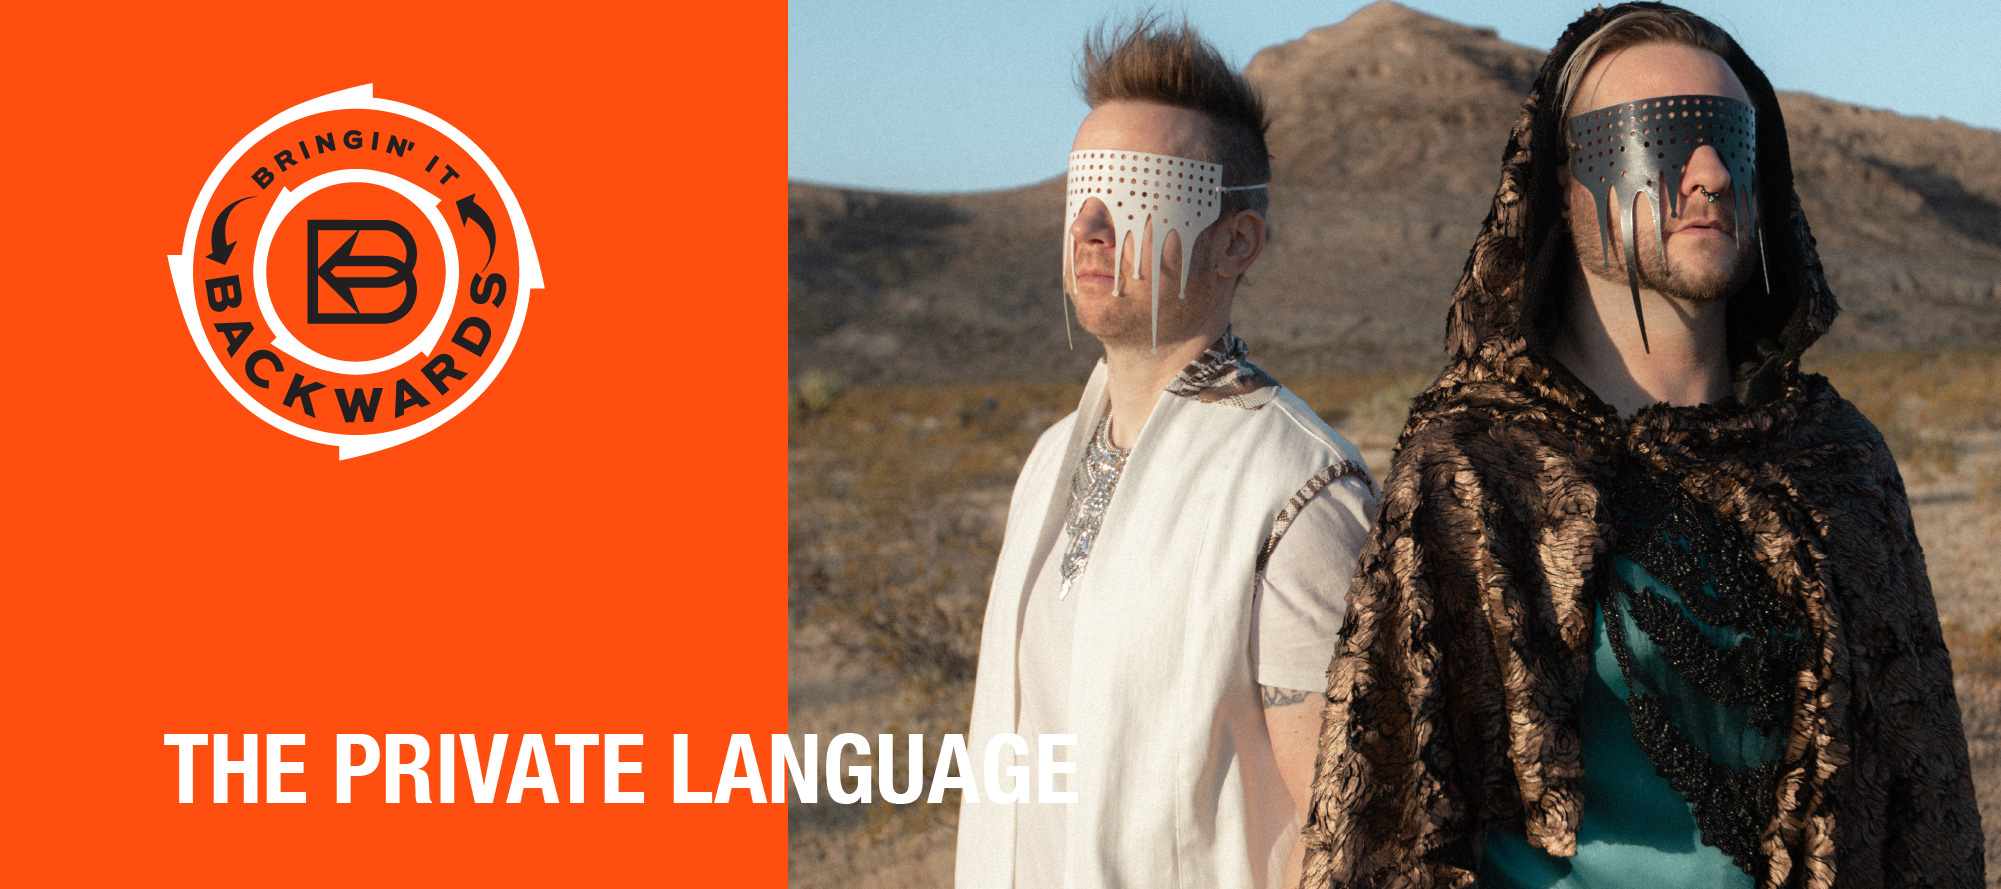 Bringin’ it Backwards: Interview with The Private Language